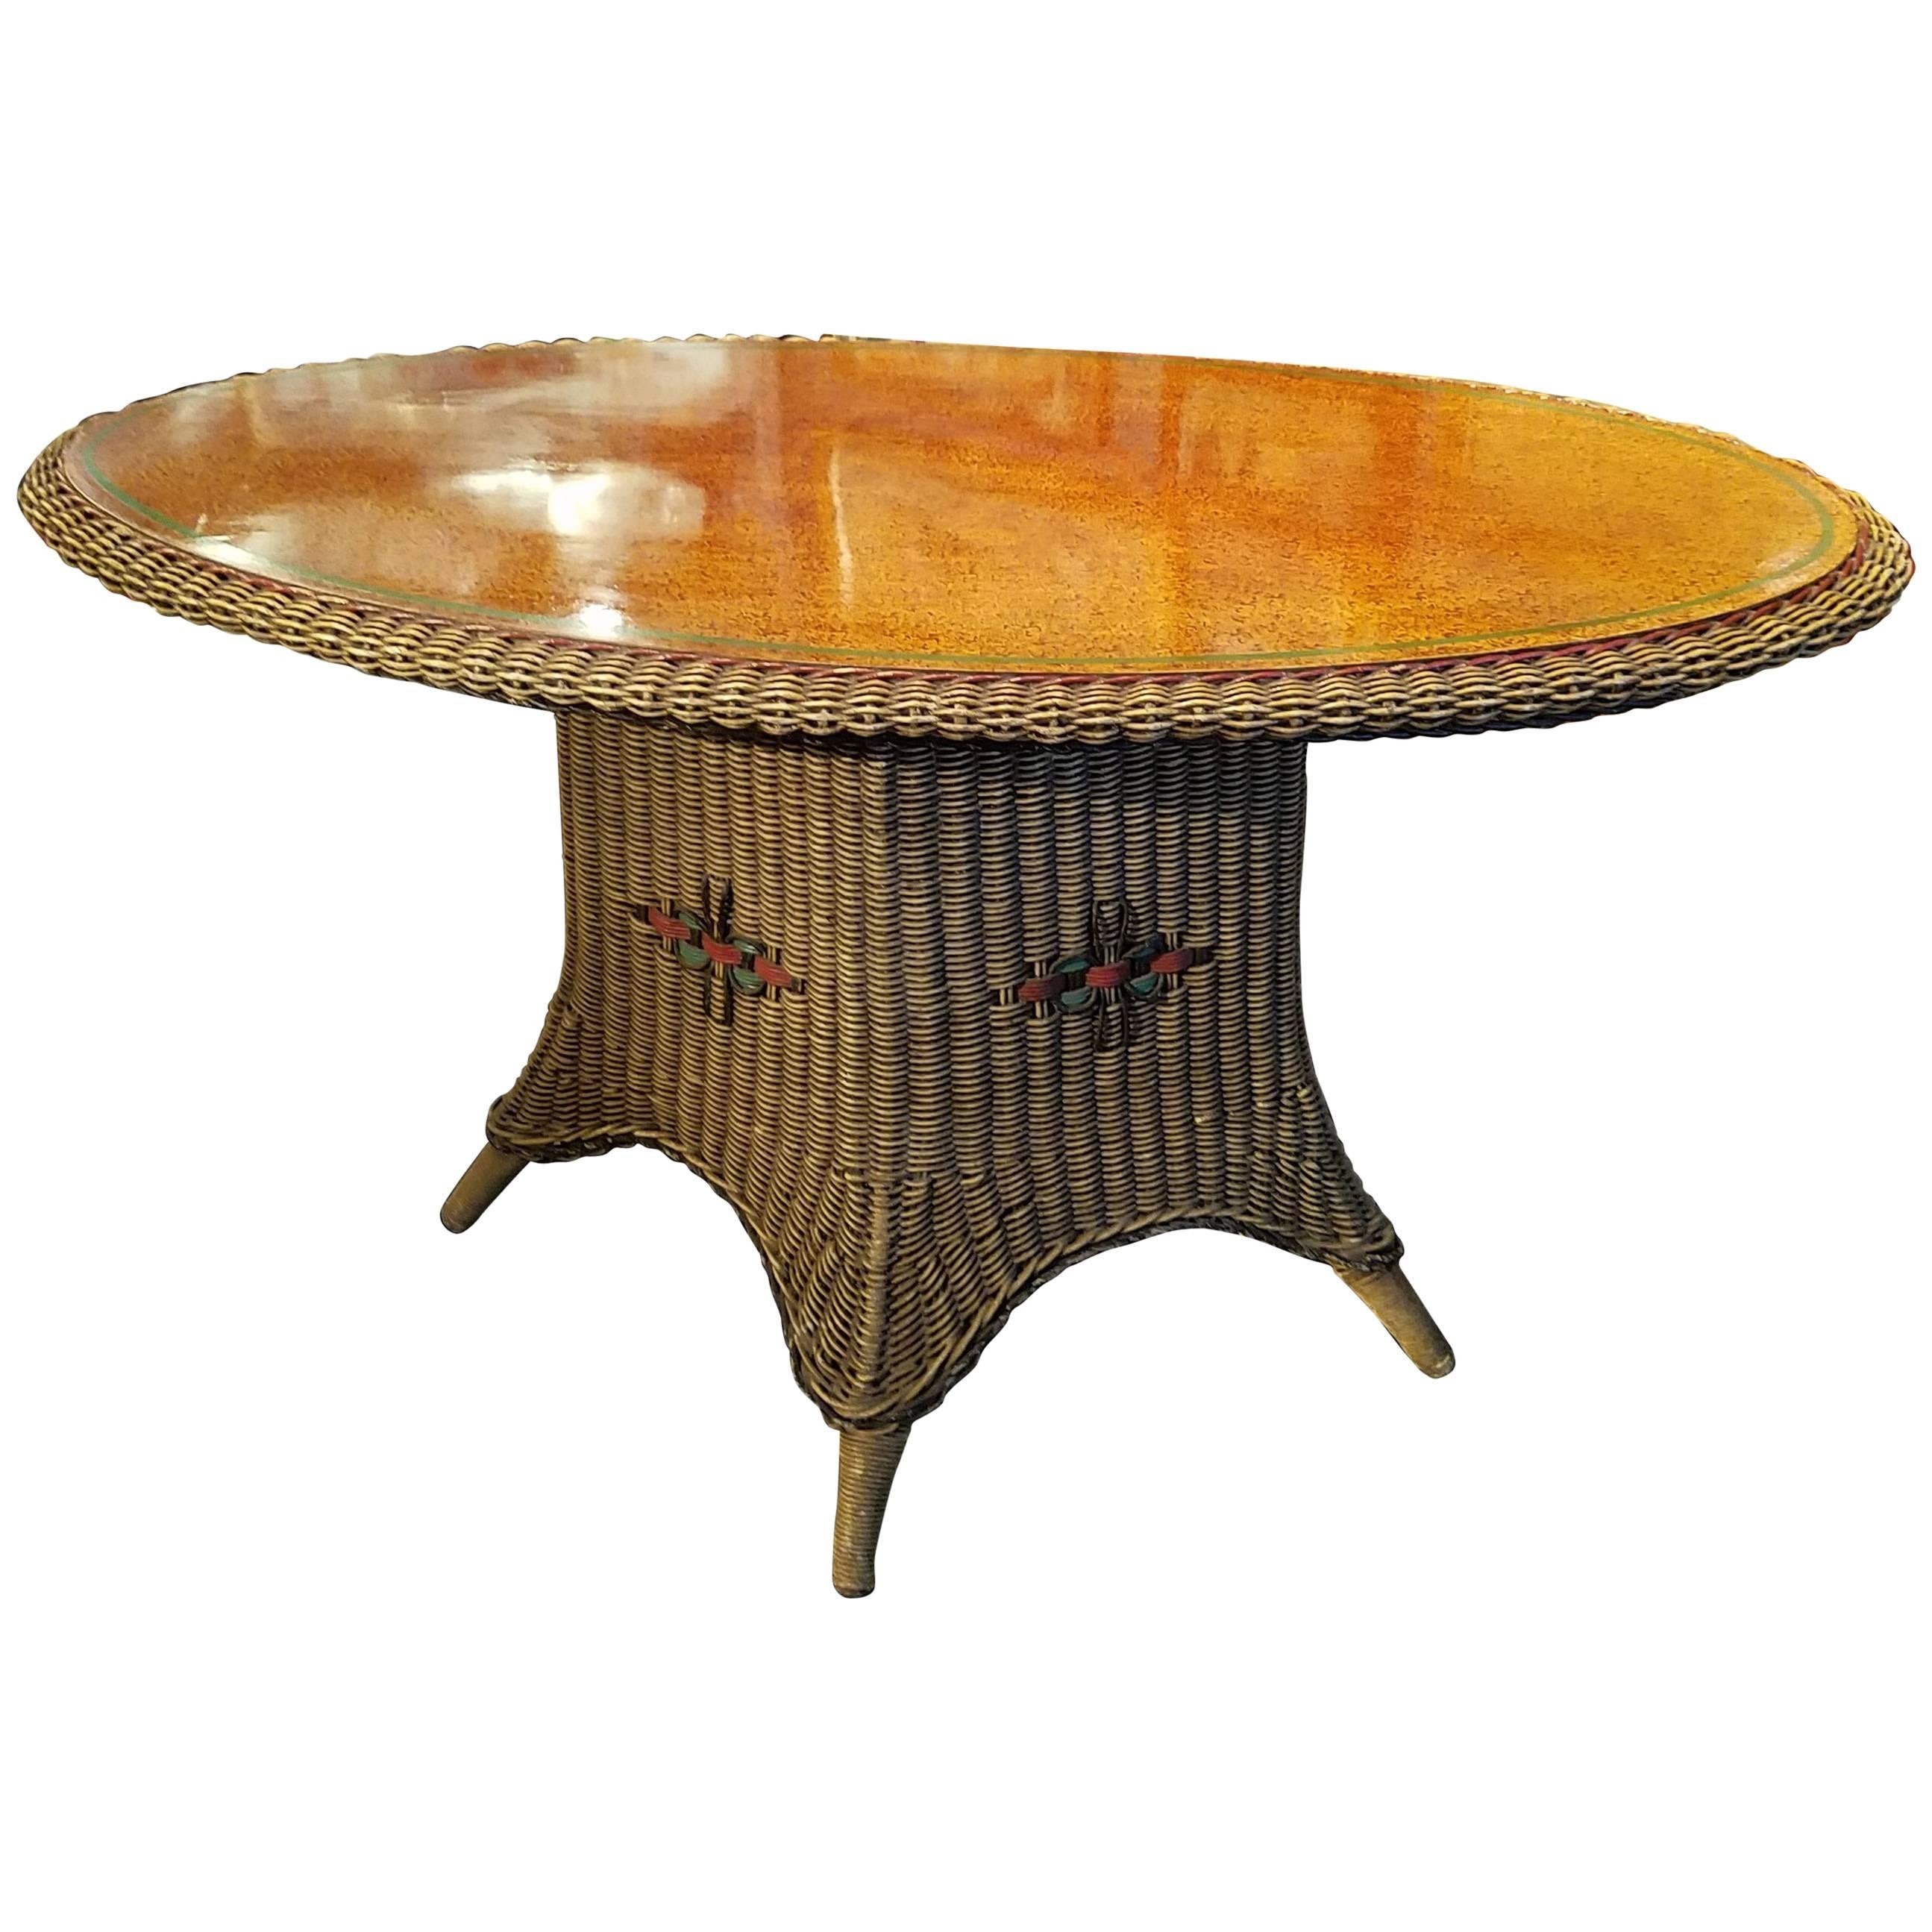 American Wicker Large Table with Grain-Painted Top, By Merikord, Circa 1920s.